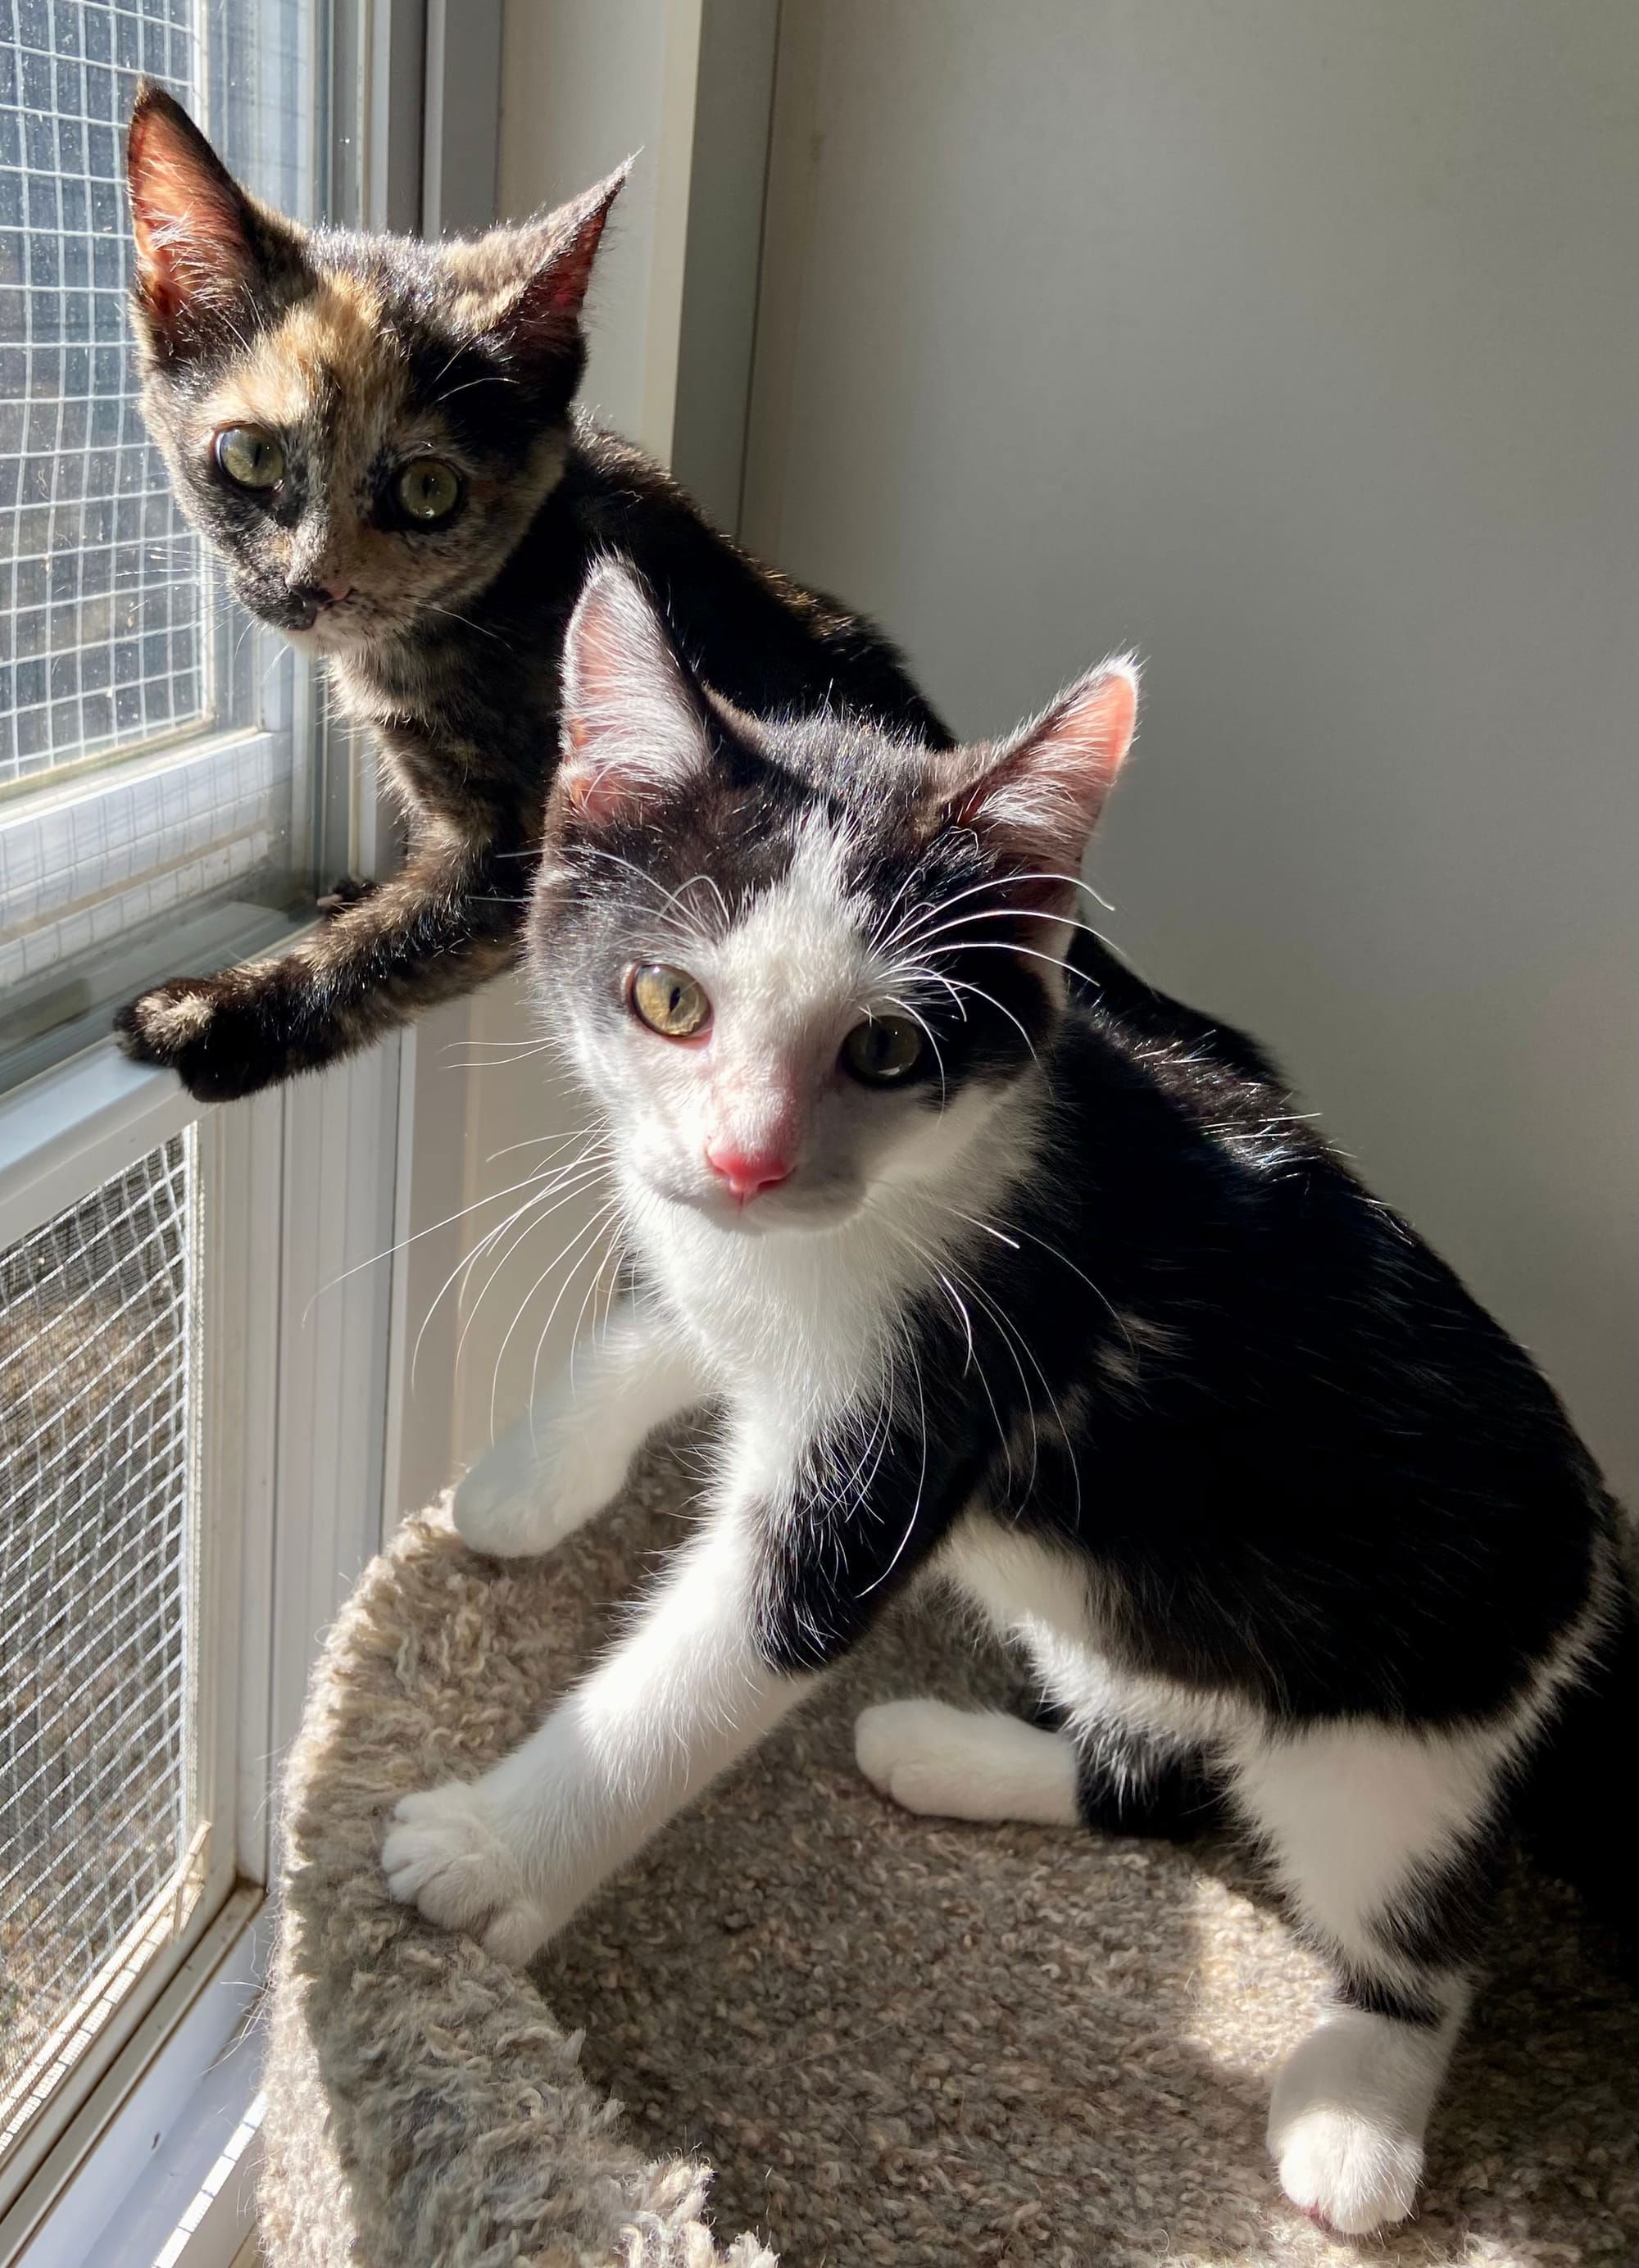 Count & Linda (Linda is pending adoption, Count is available)